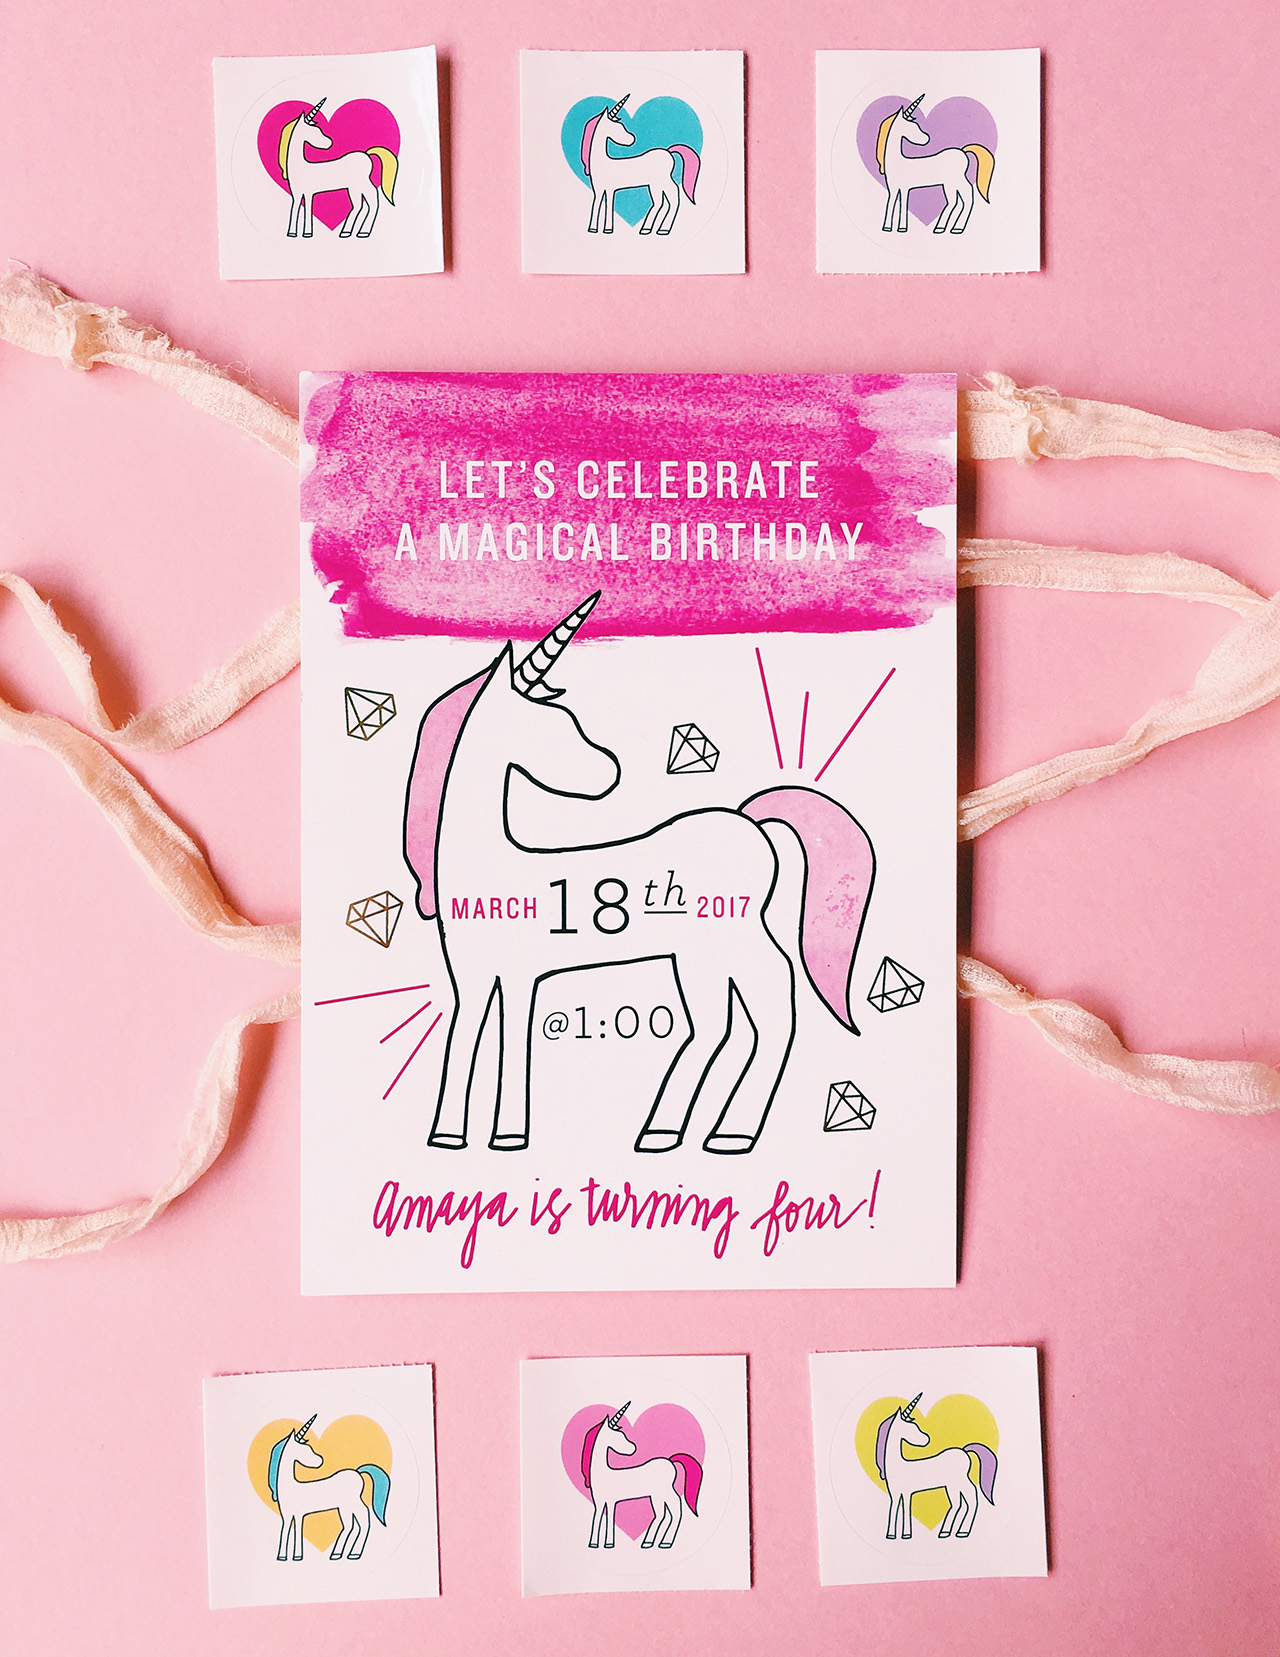 Unicorn and Gemstone Inspired Birthday Party Invitations by Flyover Design Co.